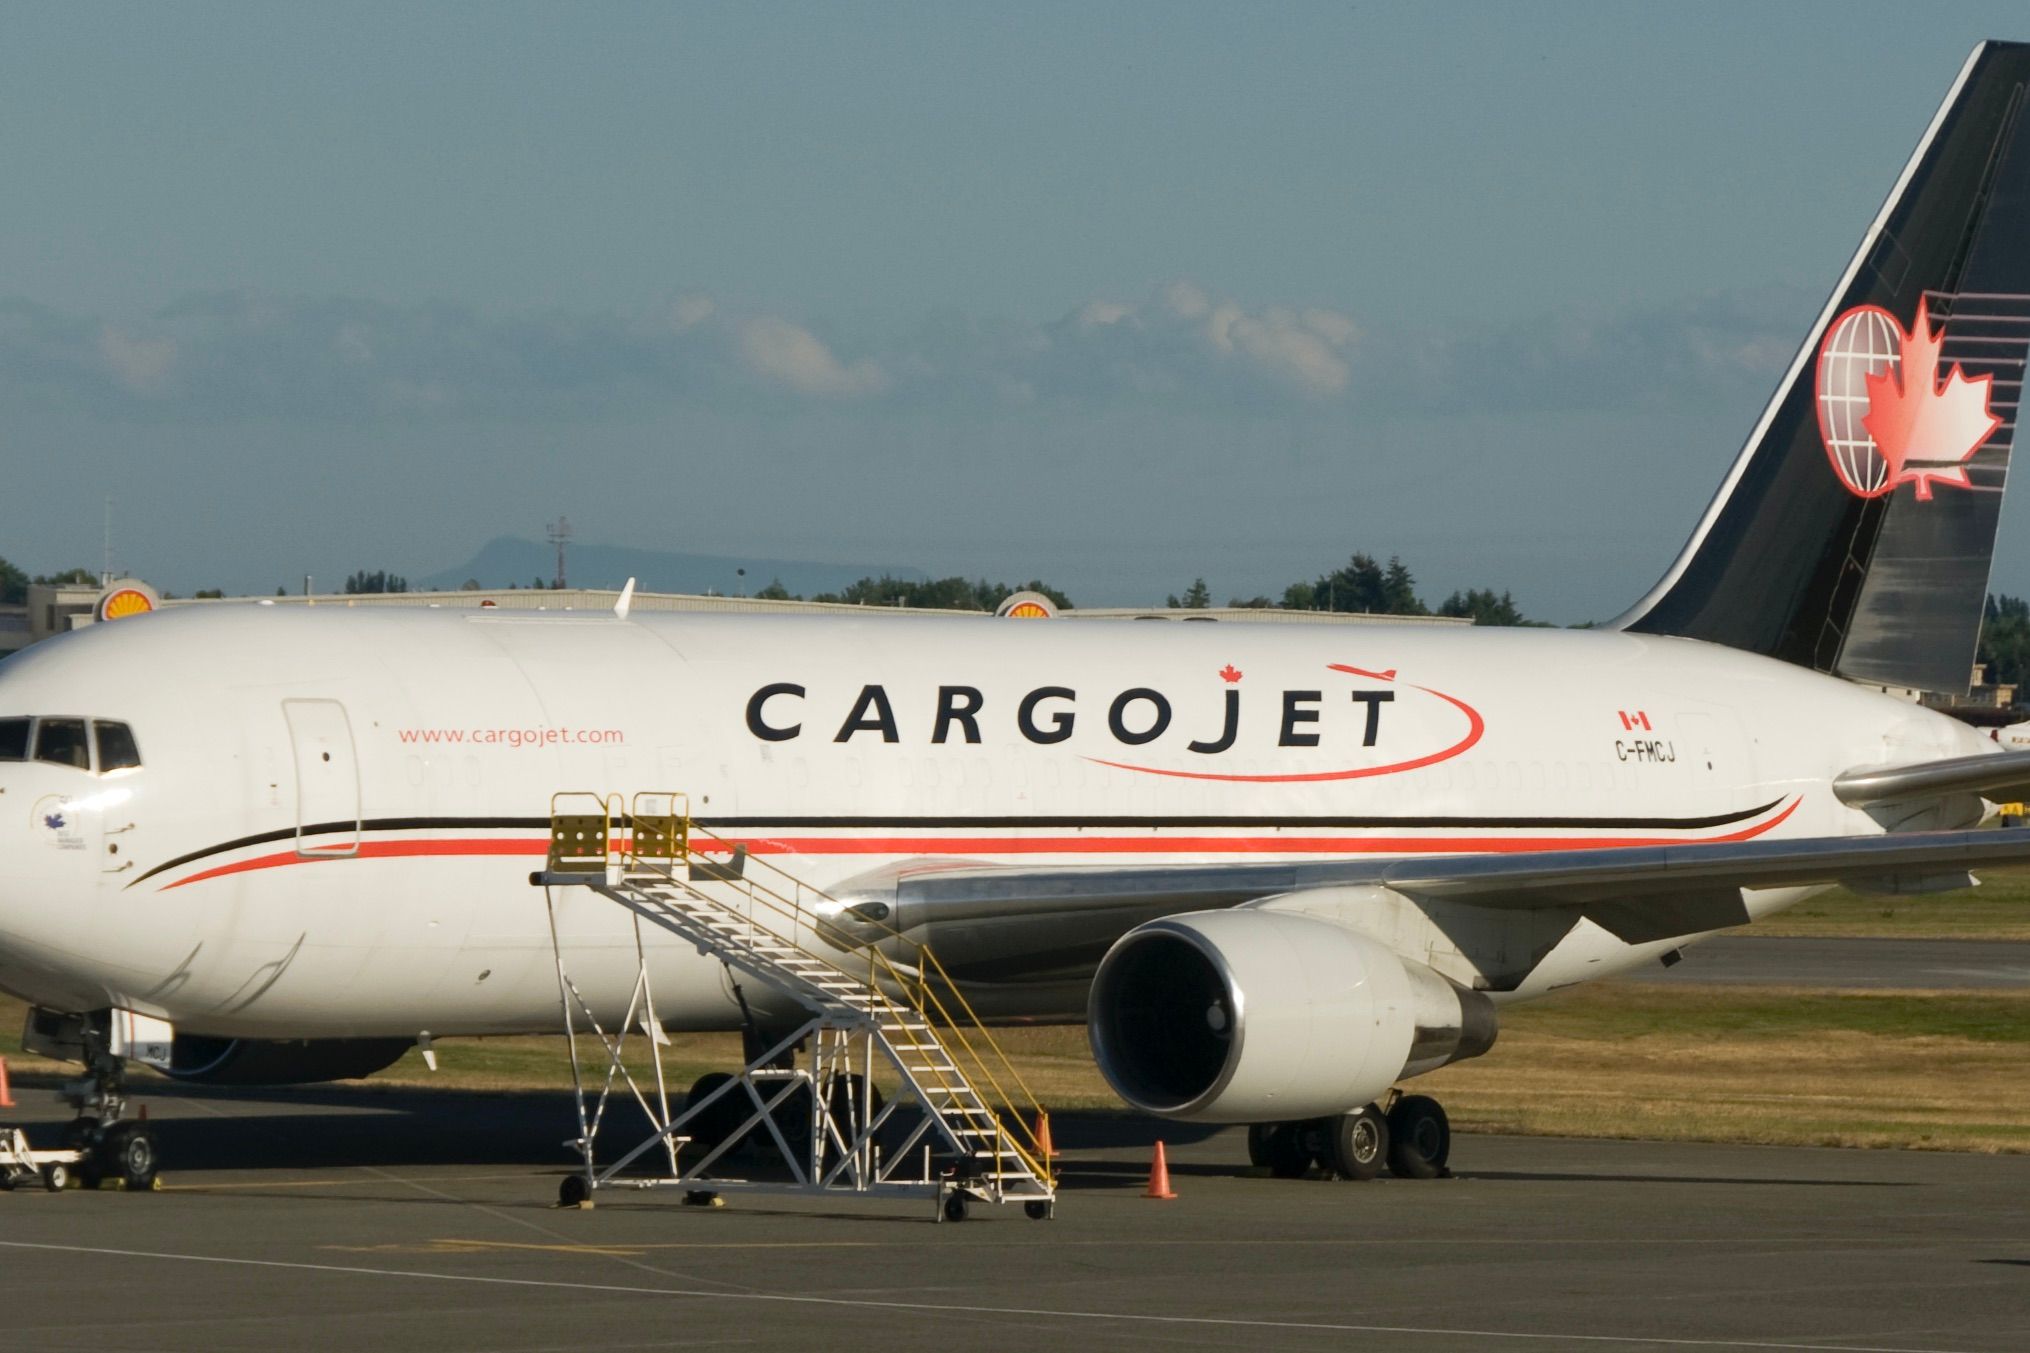 A Cargojet Boeing 767-200 on an airport apron.